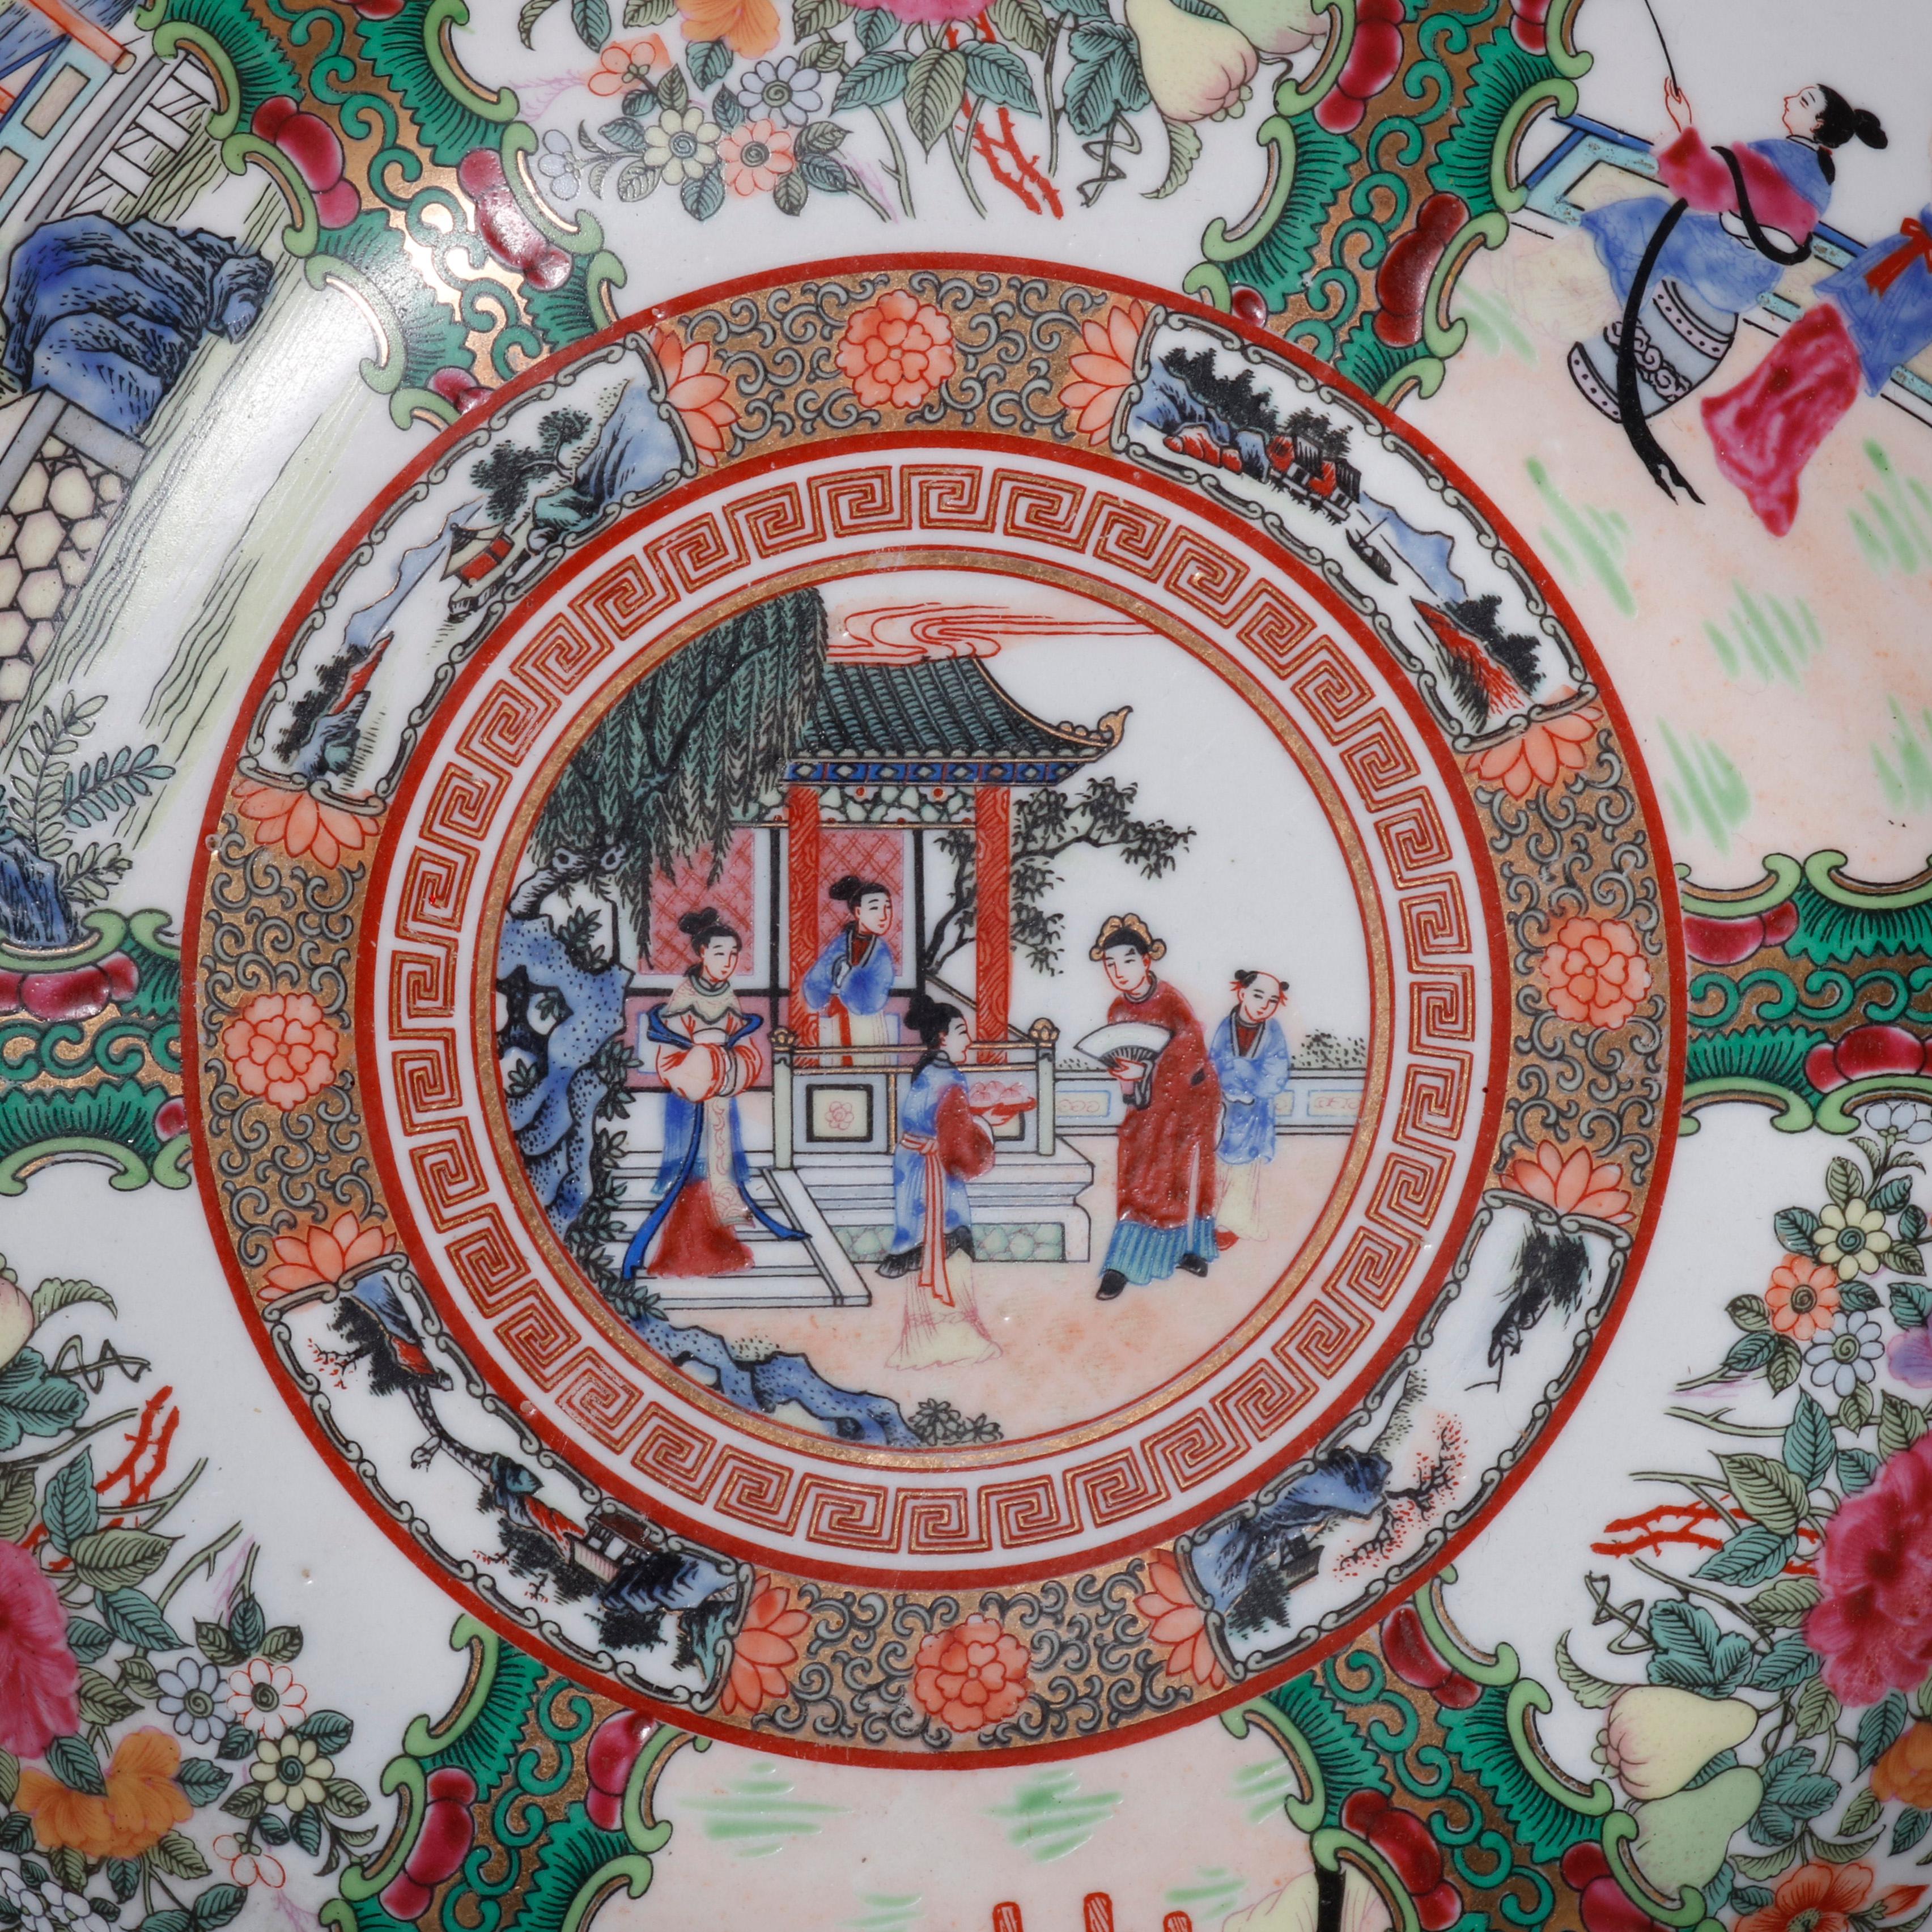 A large Chinese Rose Medallion porcelain center bowl offers hand painted enameled genre and garden reserves including figures, birds, animals, flowers, and pagoda structures, bordered with foliate elements and Greek key banding, gilt highlights